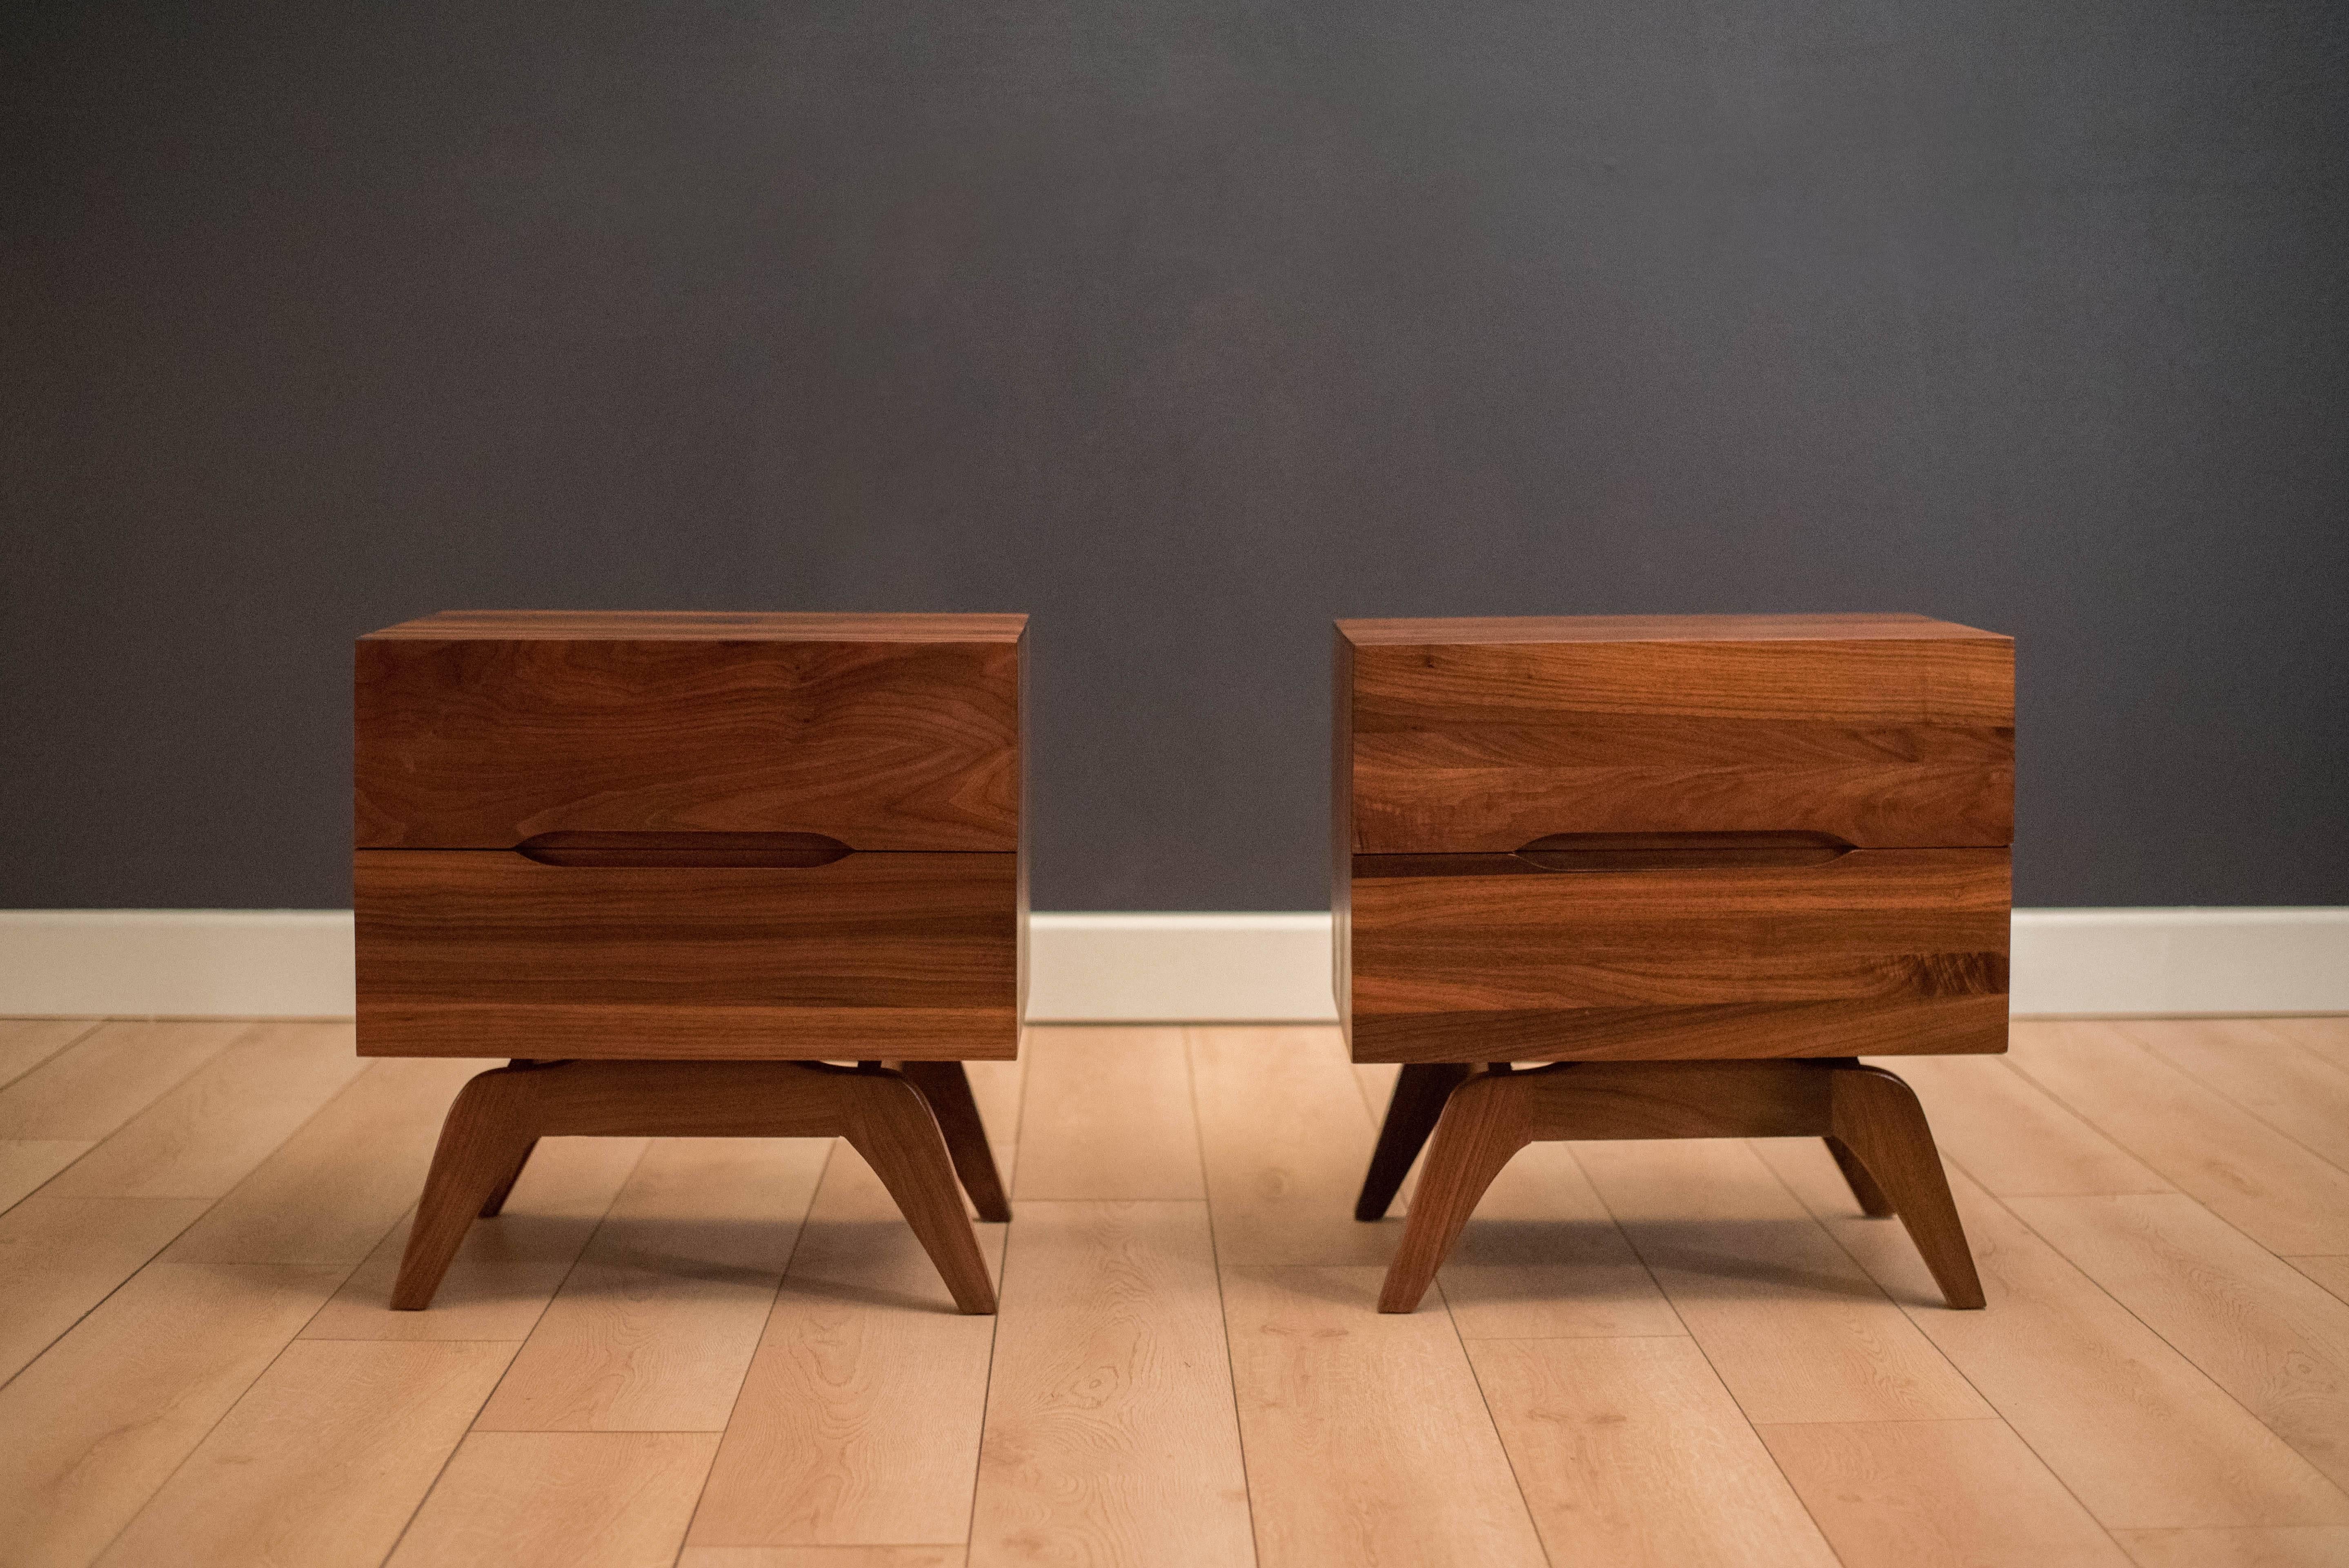 Vintage matching pair of nightstands in solid planked walnut, circa 1960s. This set features a unique sculpted base and includes two storage drawers with inset pulls. Price is for the set.